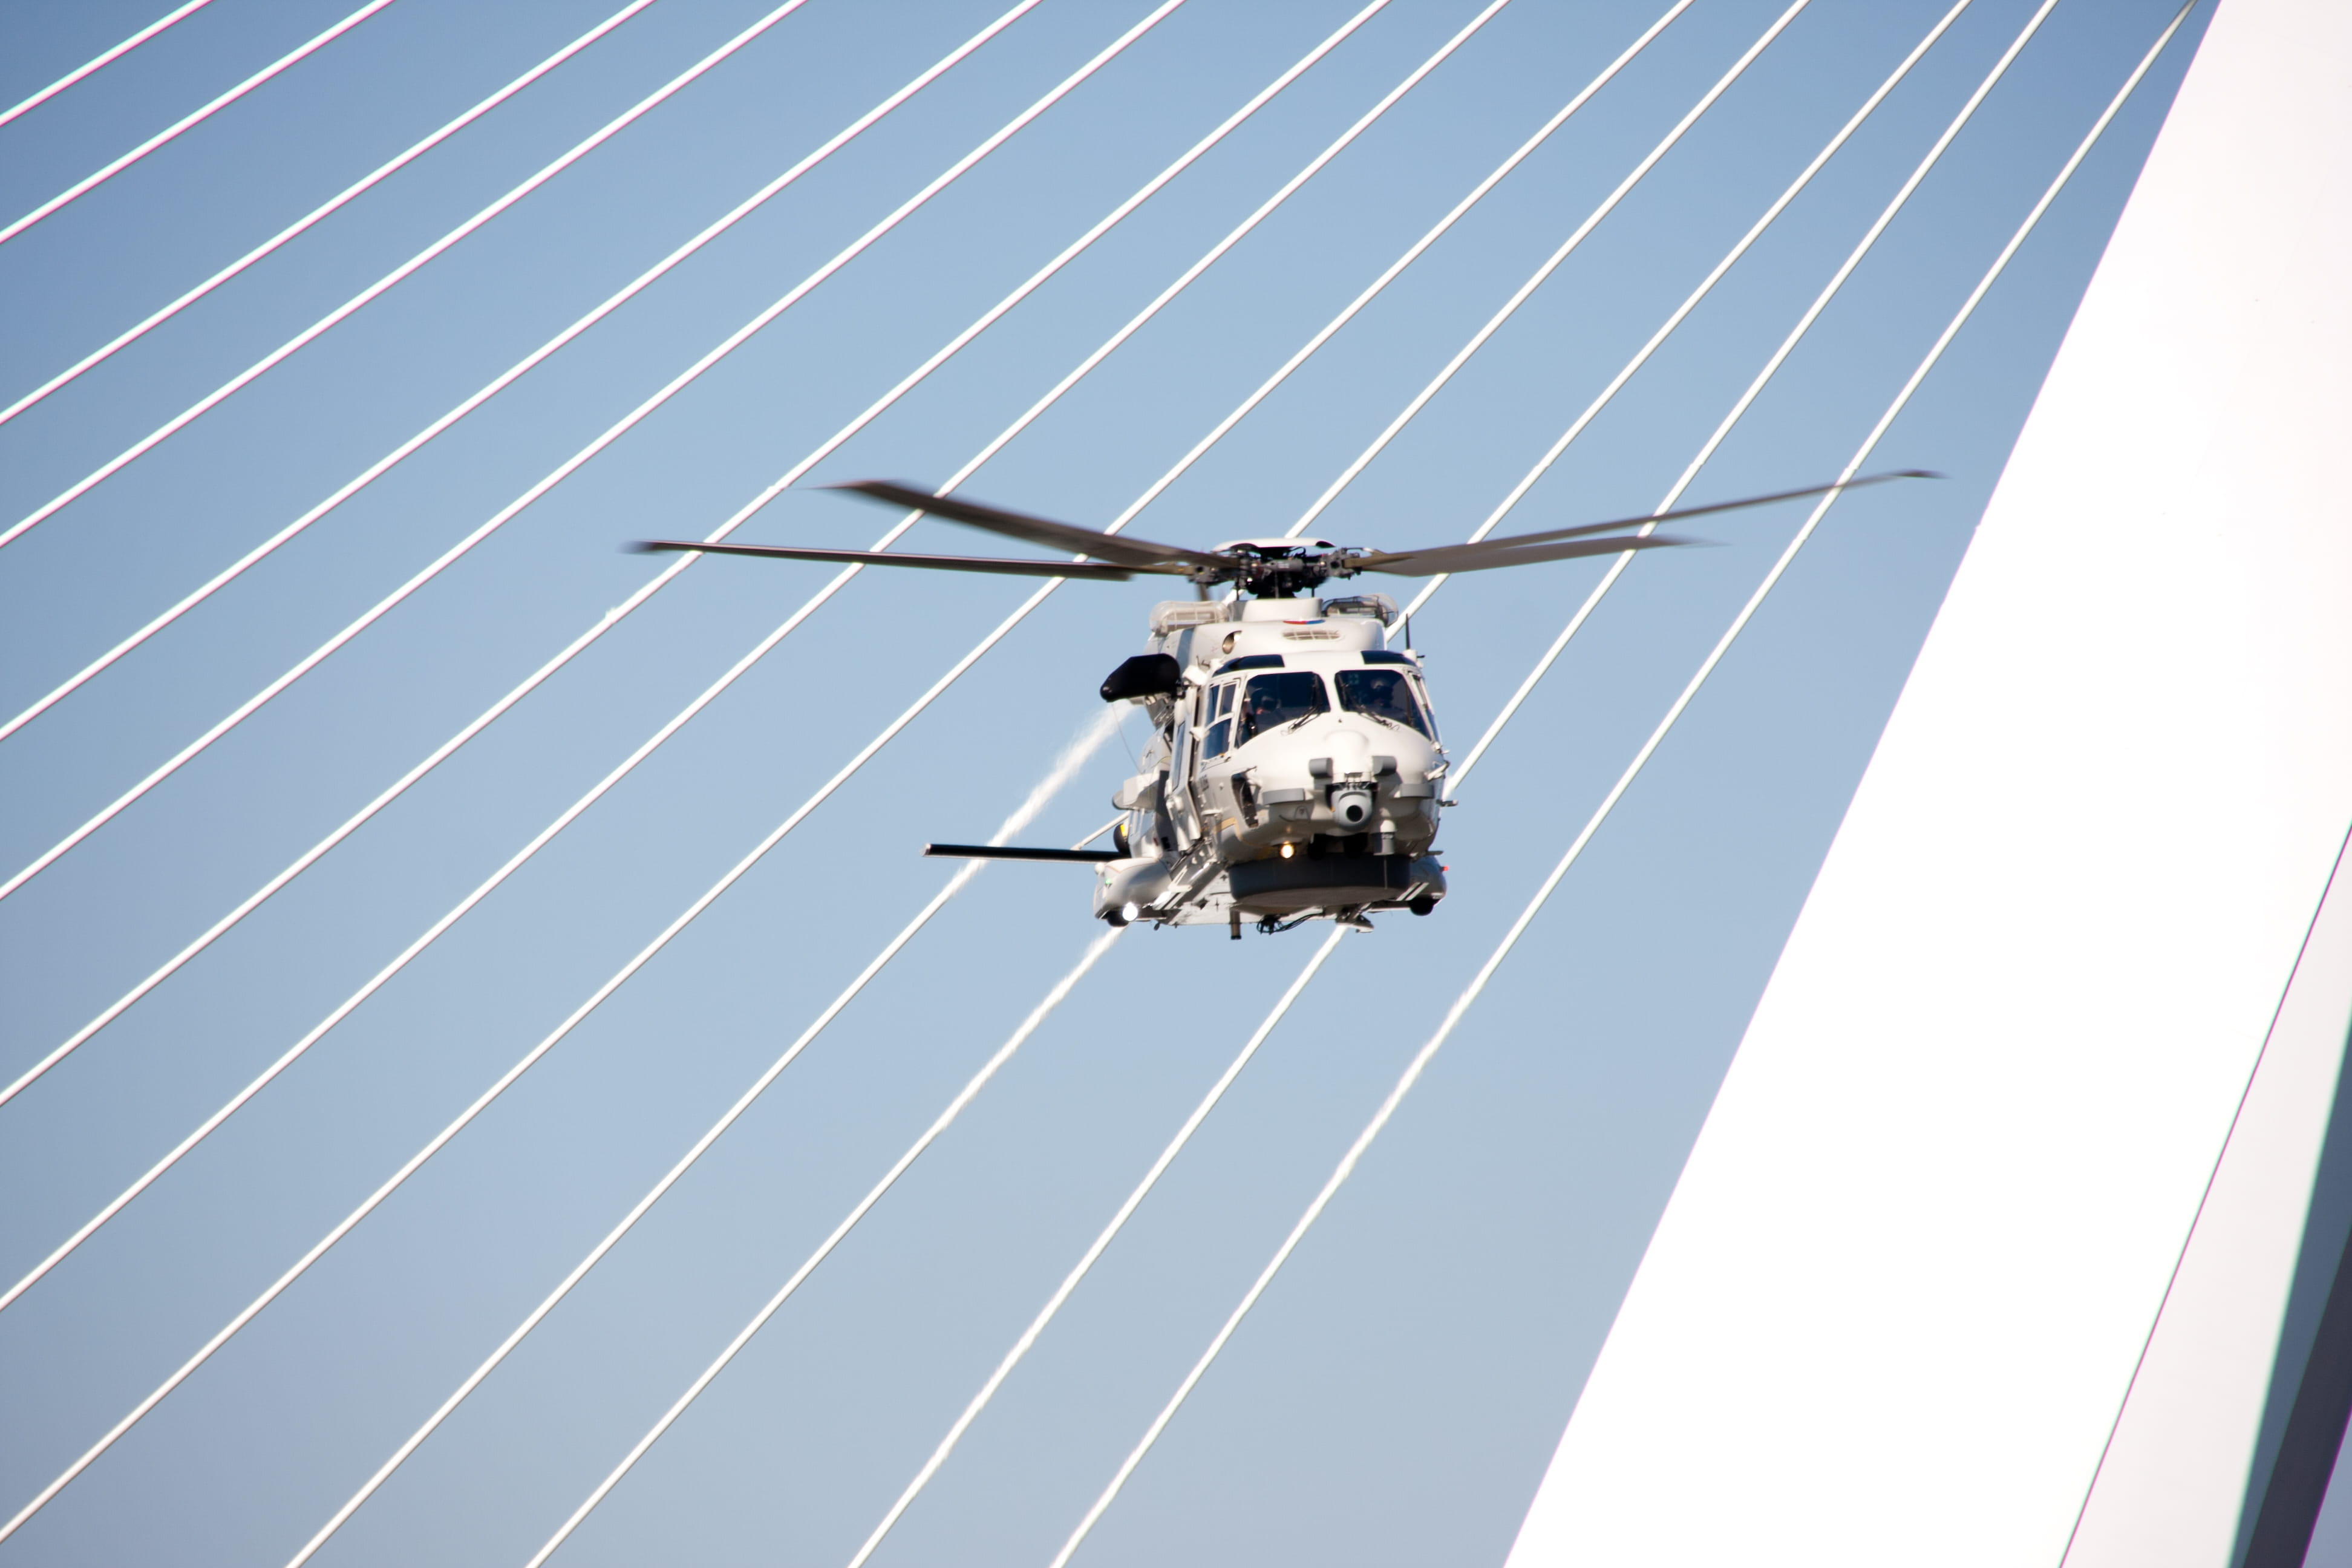 helicopter passing through building, rotterdam, erasmusbrug, aircraft